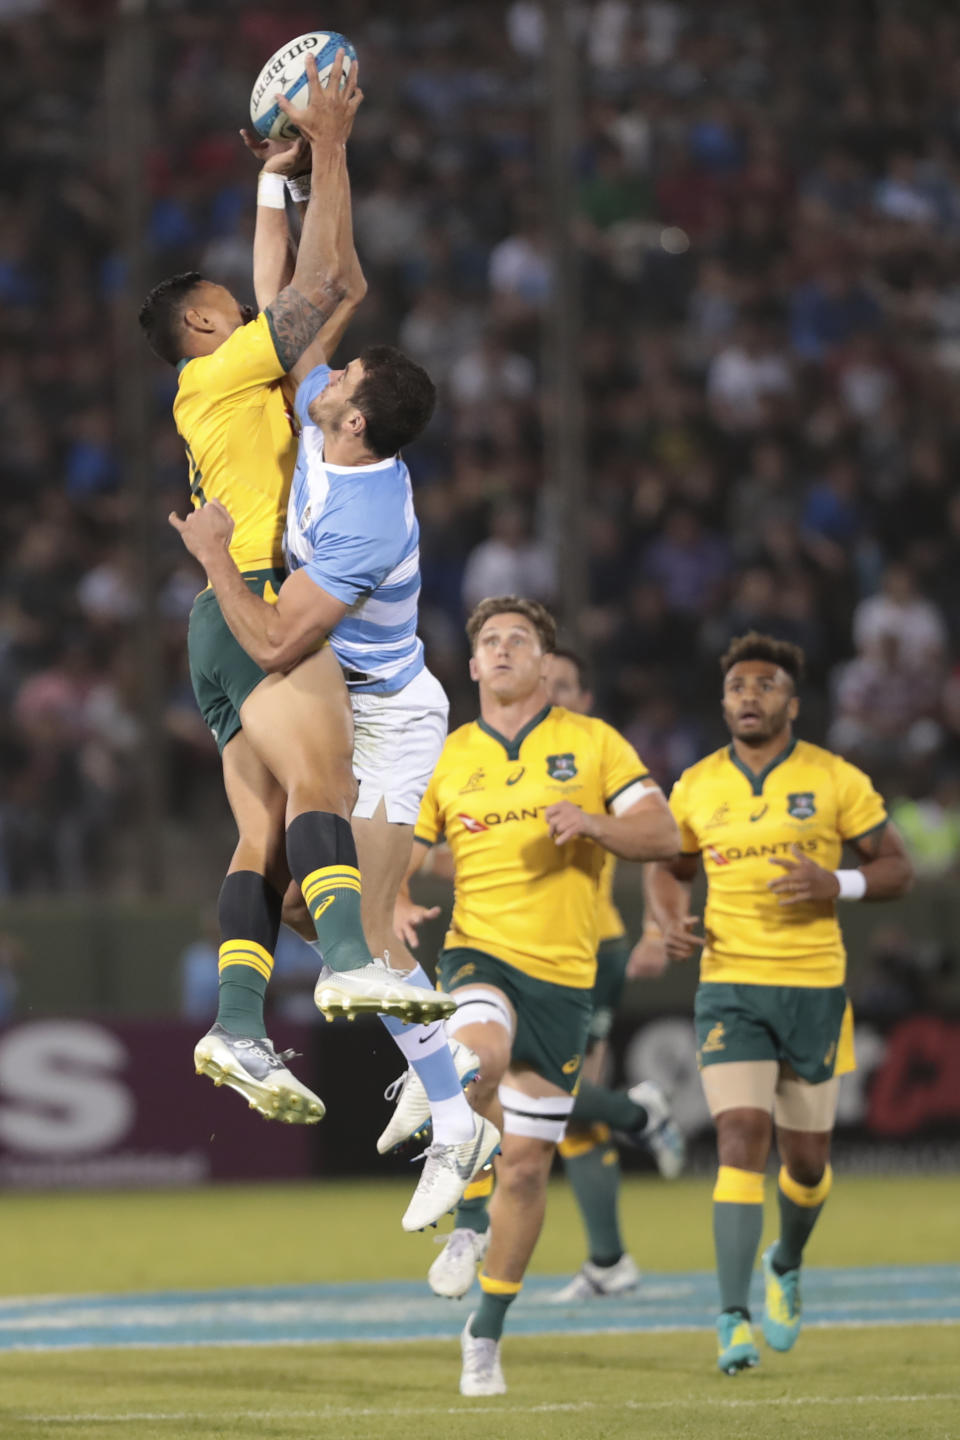 Australia's Israel Folau, left, and Argentina's Emiliano Boffelli struggle for the ball in a line-out during their Rugby Championship match in Salta, Argentina, Saturday, Oct. 6, 2018. (AP Photo/Gonzalo Prados)